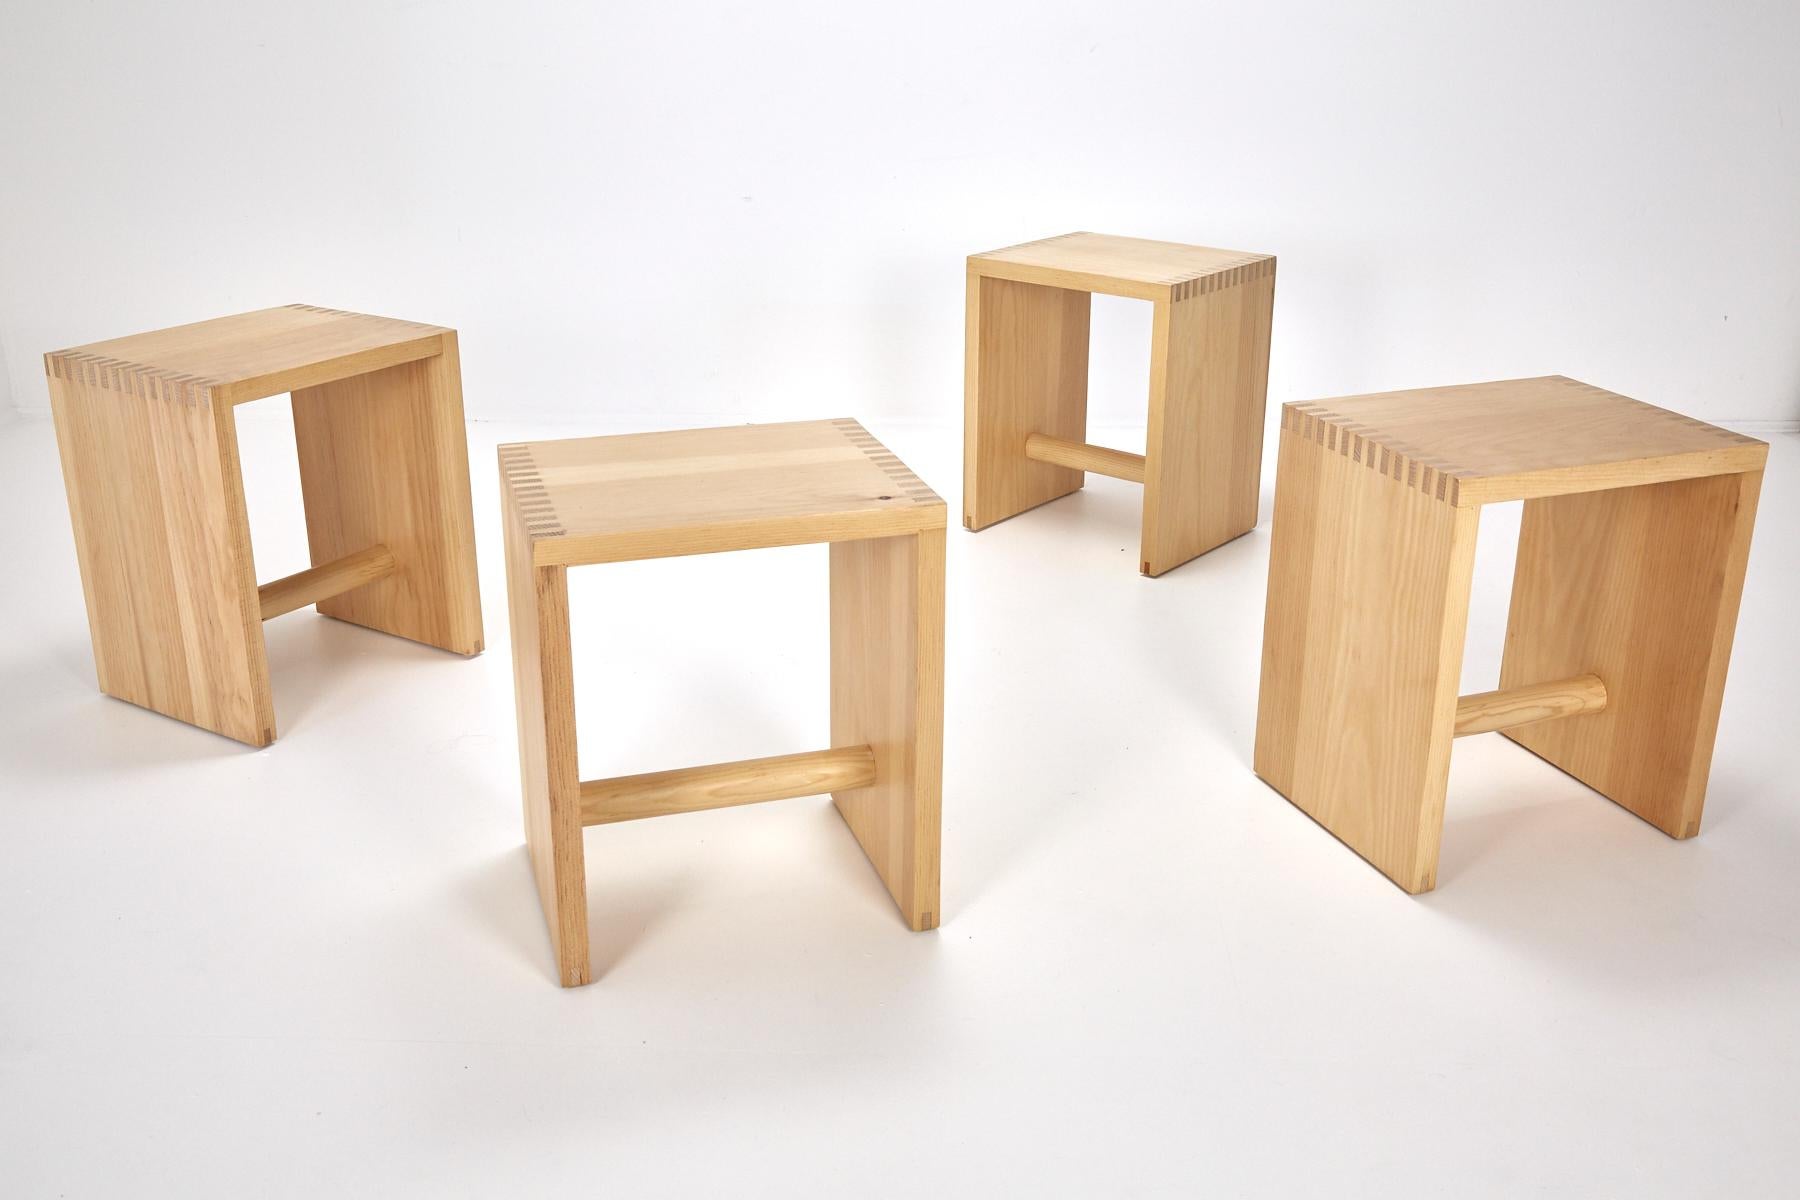 Set of four solid pine rectilinear stools with cylindrical foot rail. Edges show alternating wood grain in construction.

This multifunctional piece of furniture can be used as a seat, stand, side table, serving tray, and box for transportation.